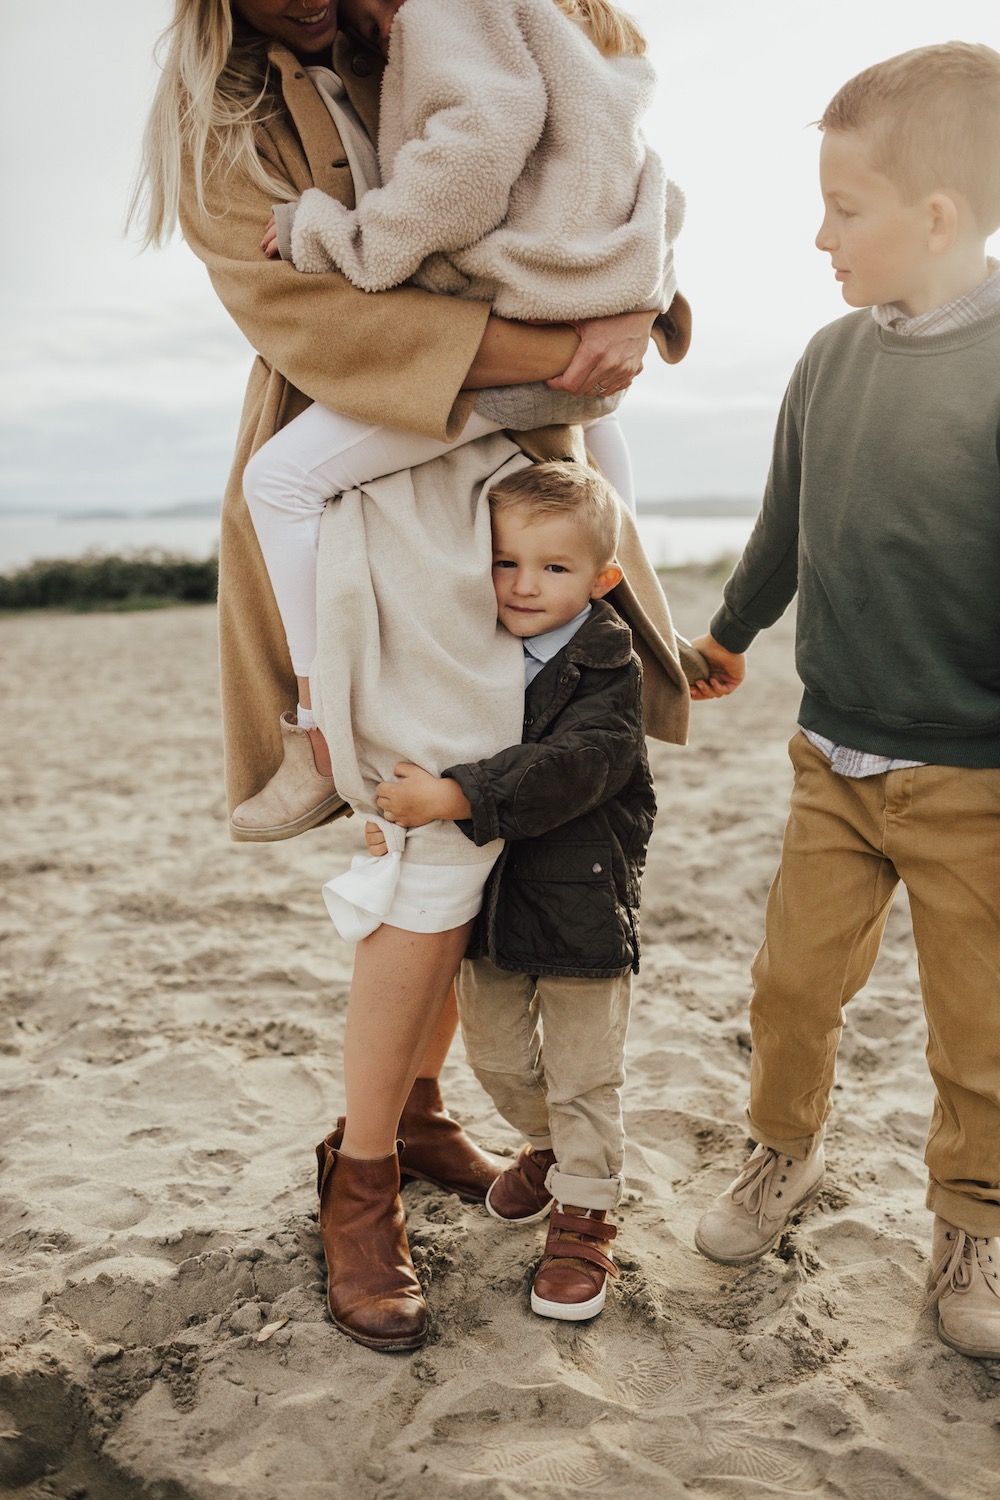 image of a family photoshoot in the fall with two small boys and a mom holding another child, everyone dressed in neutral colors